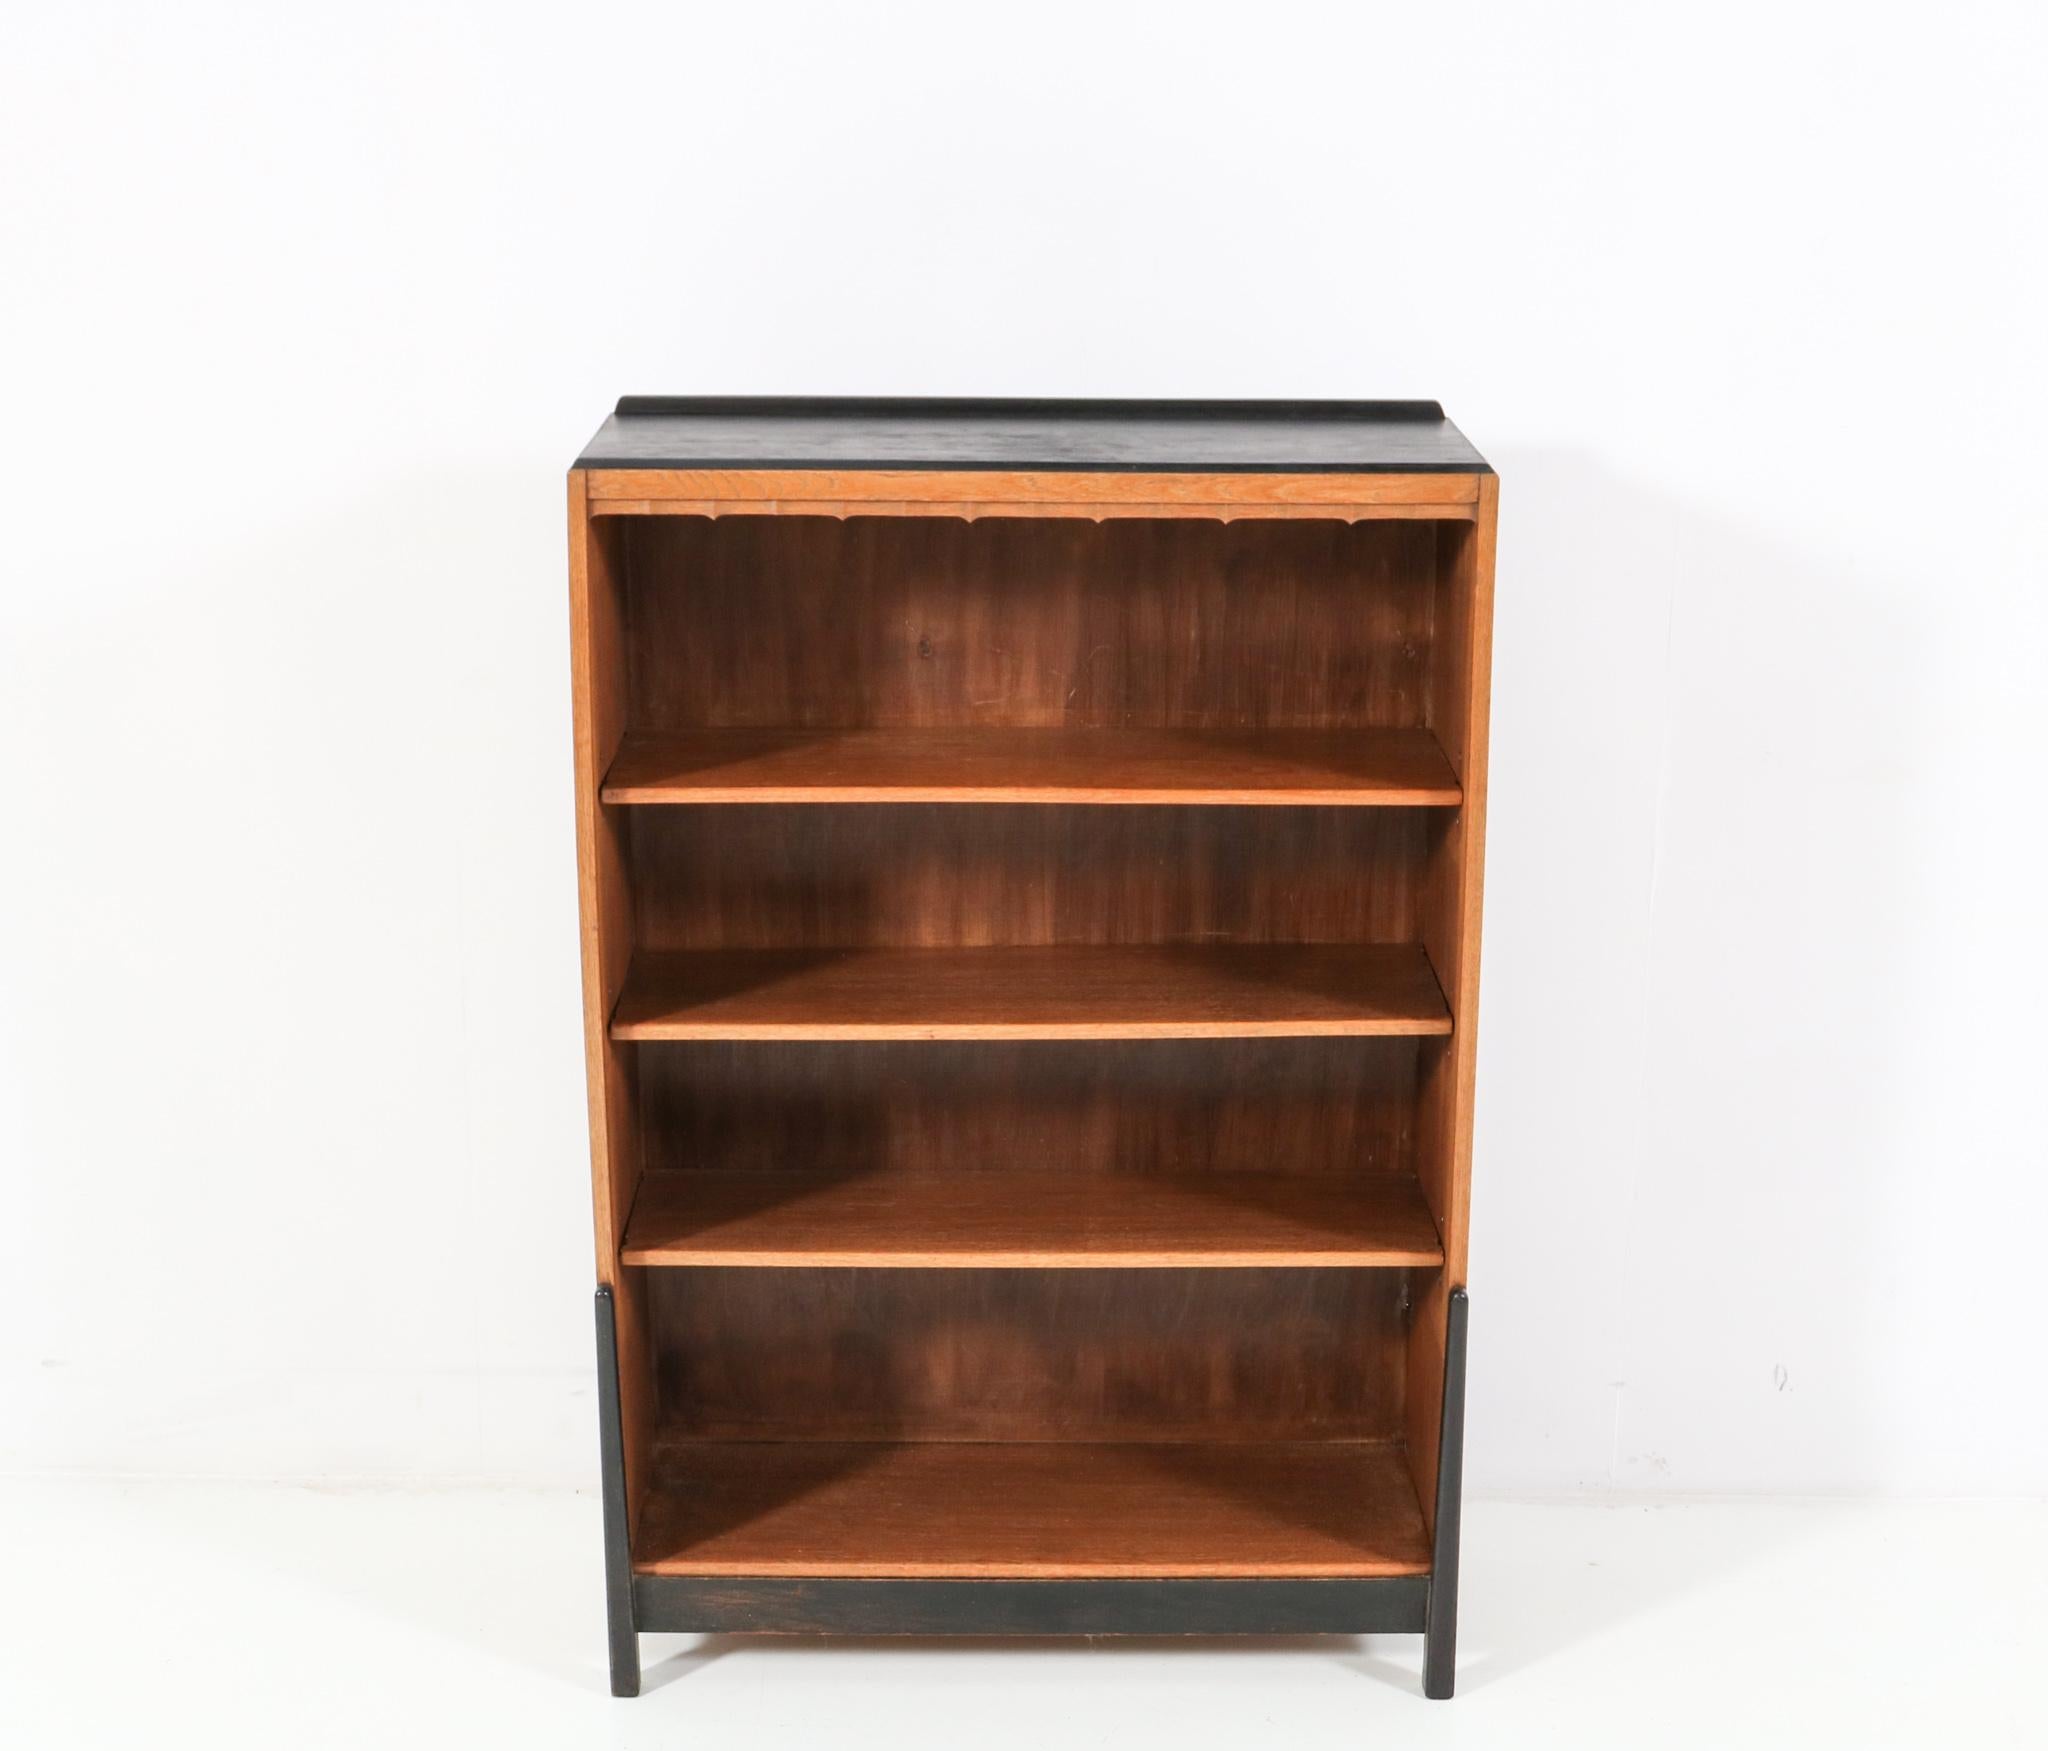 Magnificent and ultra rare Art Deco Amsterdamse School open bookcase.
Design by Willem Penaat for Metz & Co. Amsterdam.
Striking Dutch design from the 1920s.
Solid oak with original black lacquered top and front legs.
Three original solid oak